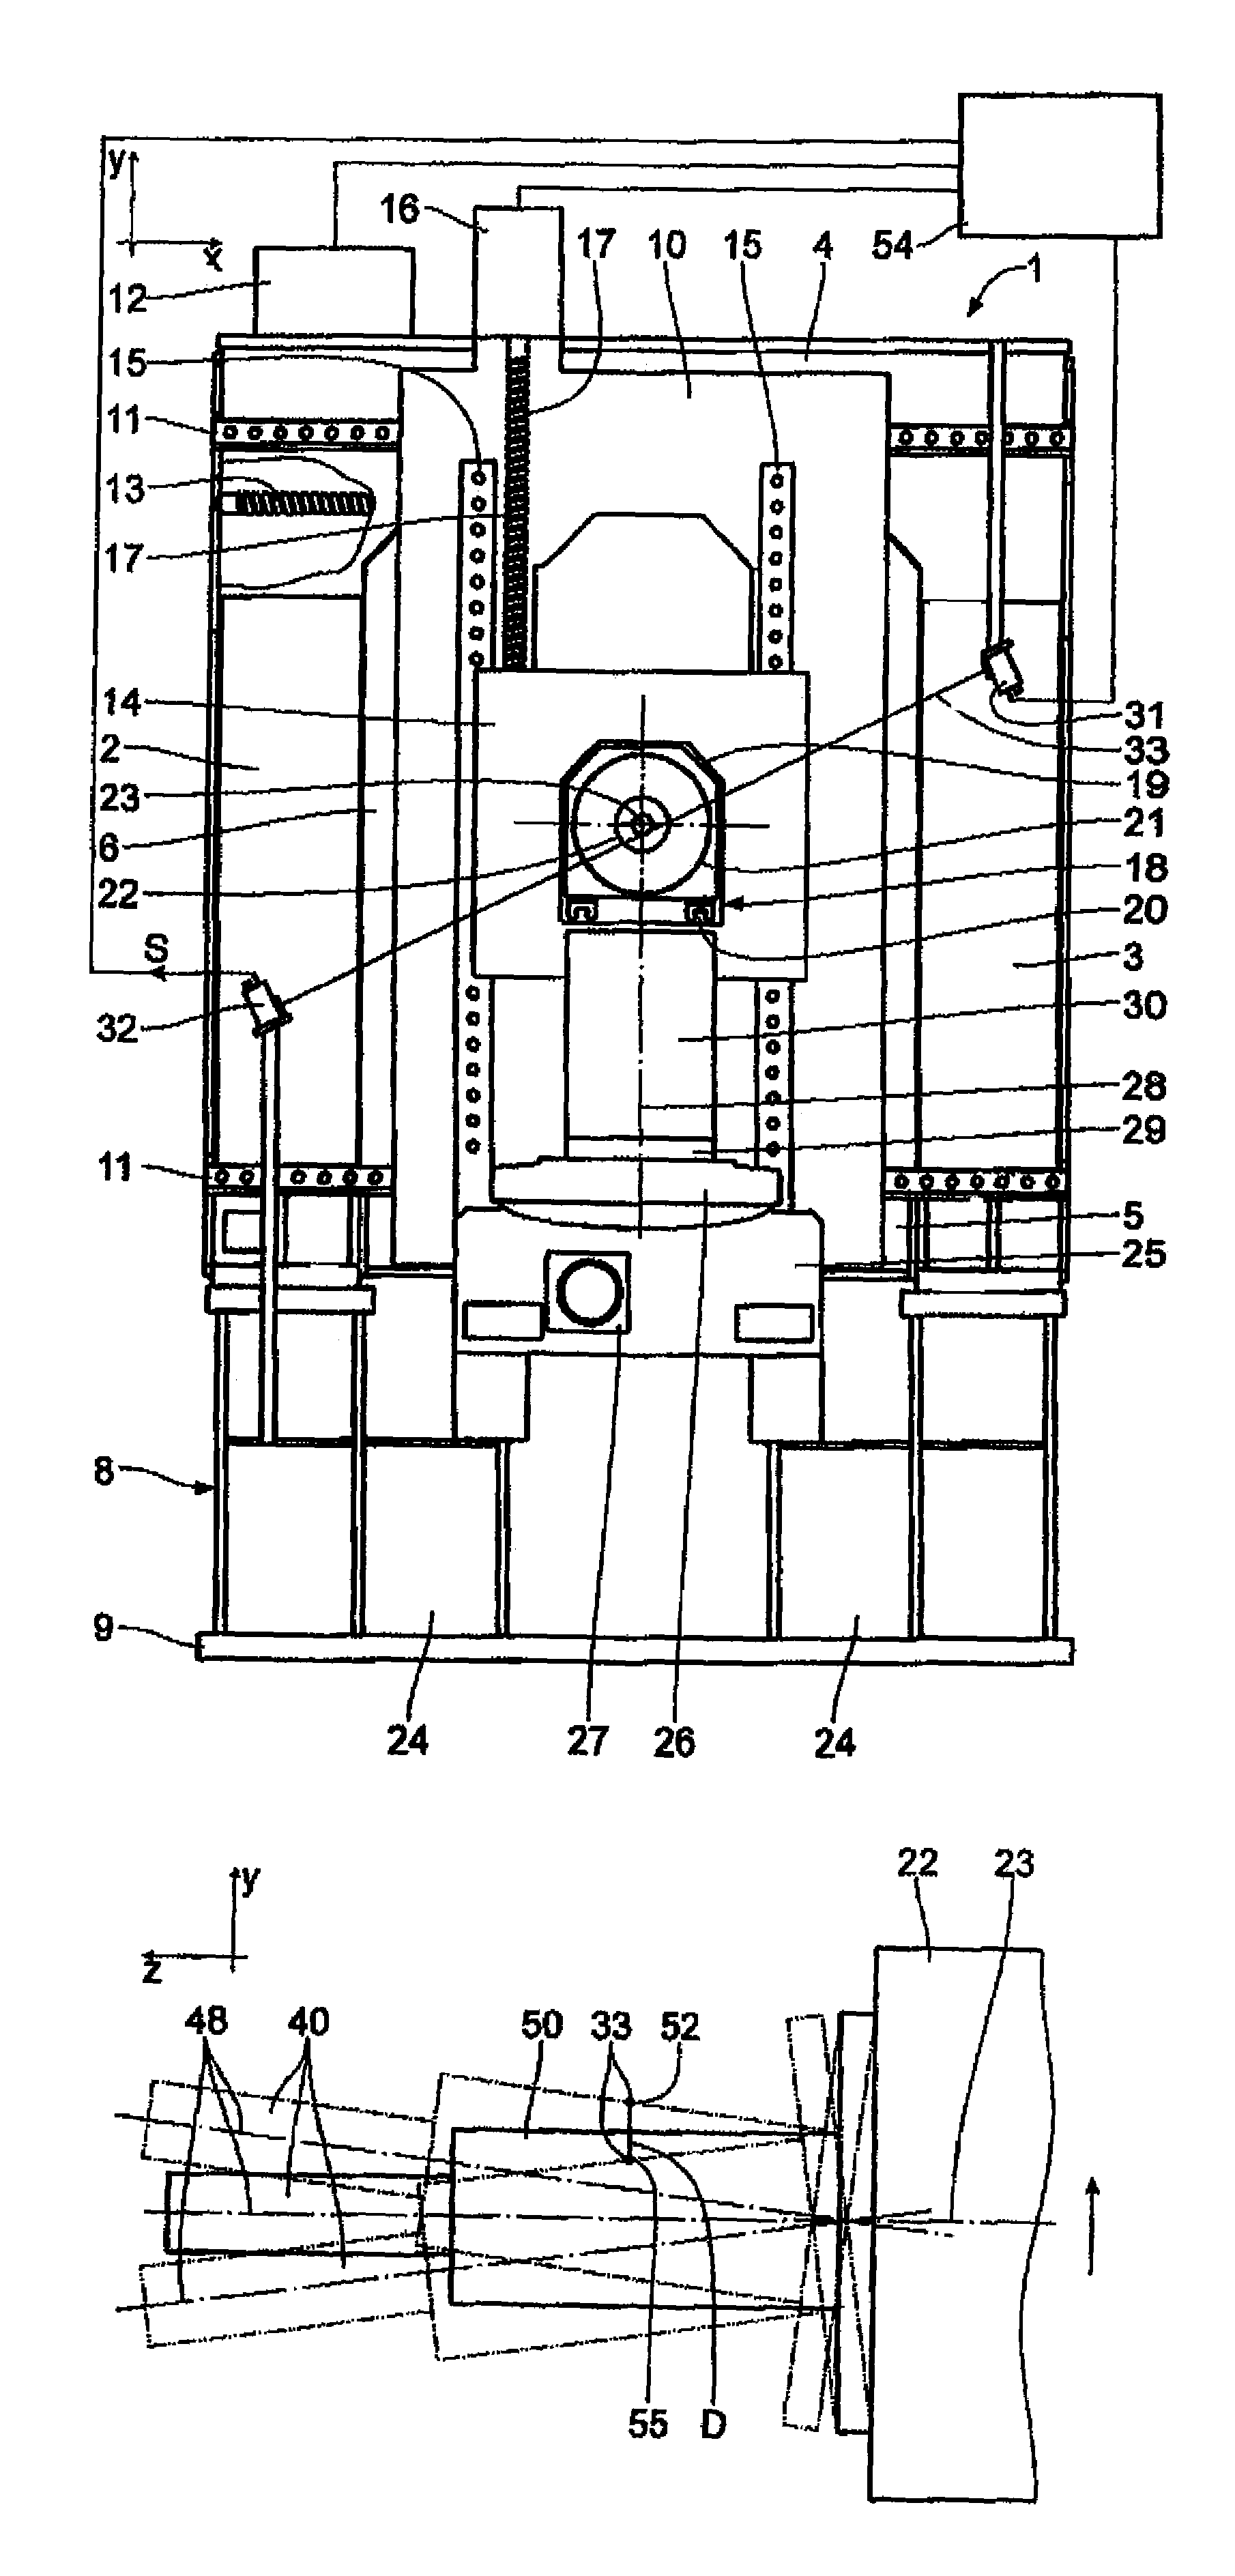 Method for testing the fit or imbalance of a tool